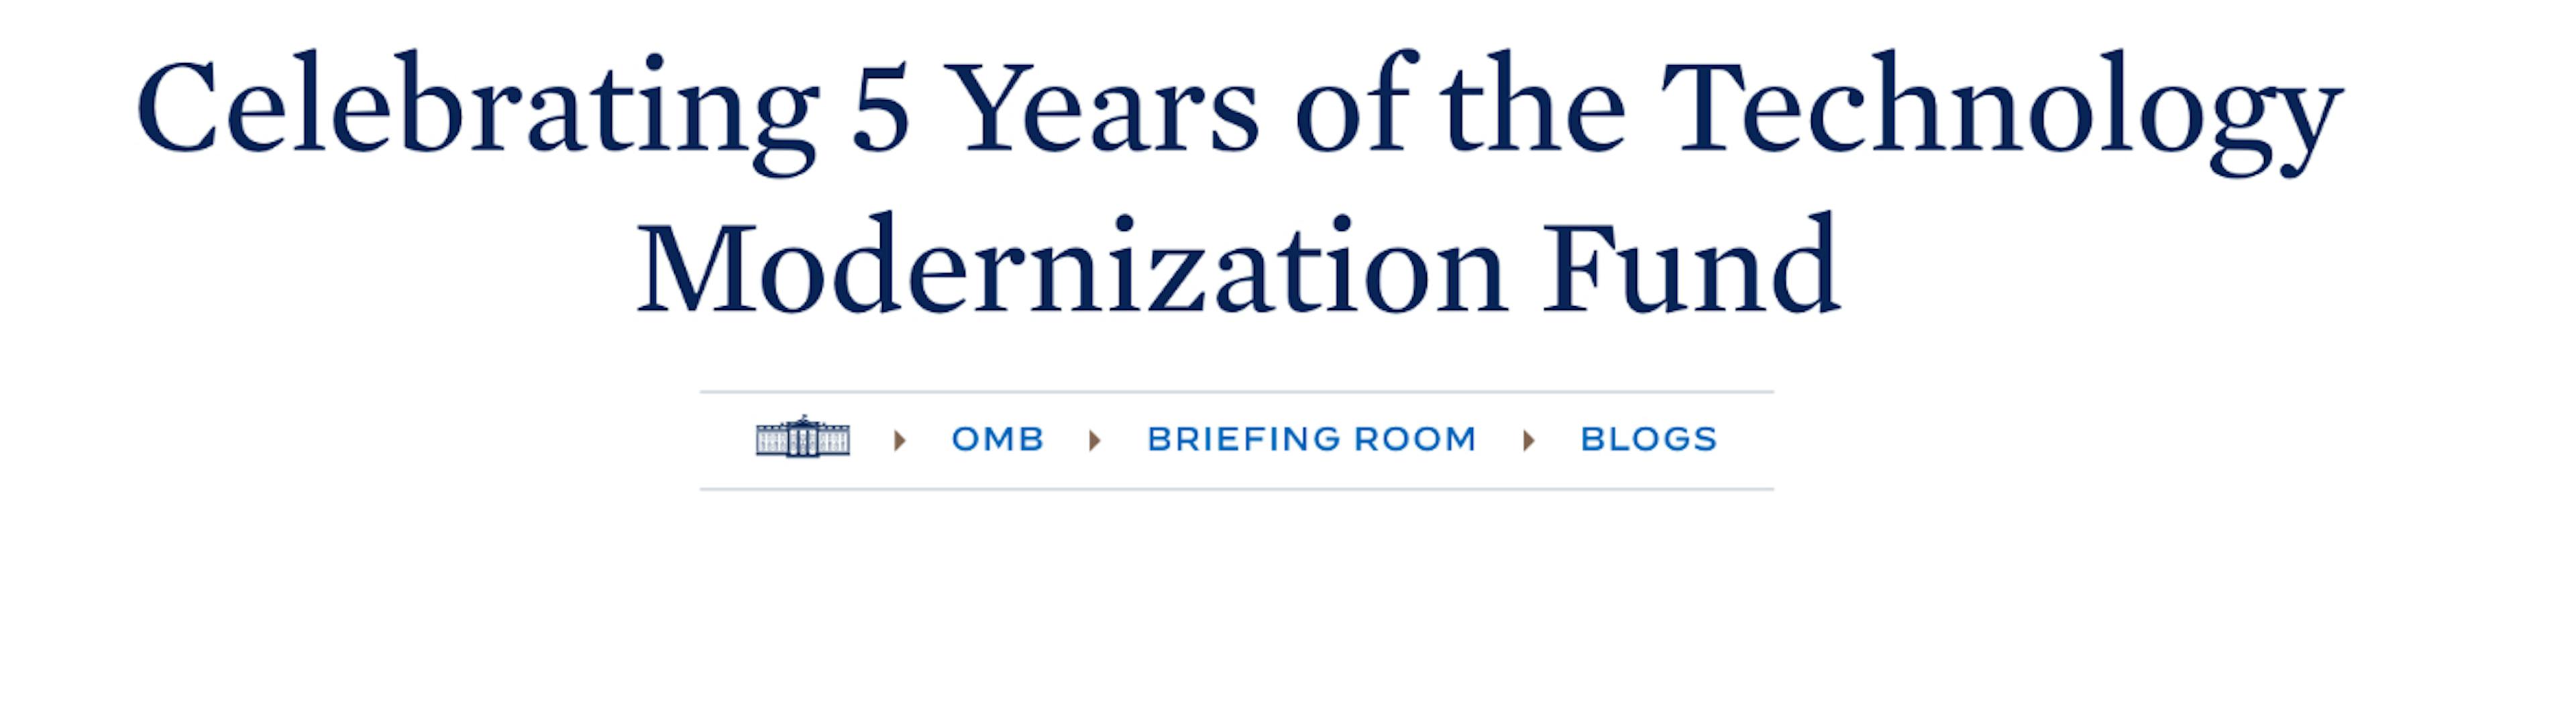 featured image - Technology Modernization Fund Celebrates 5 Years of Revolutionizing Federal Tech Projects 